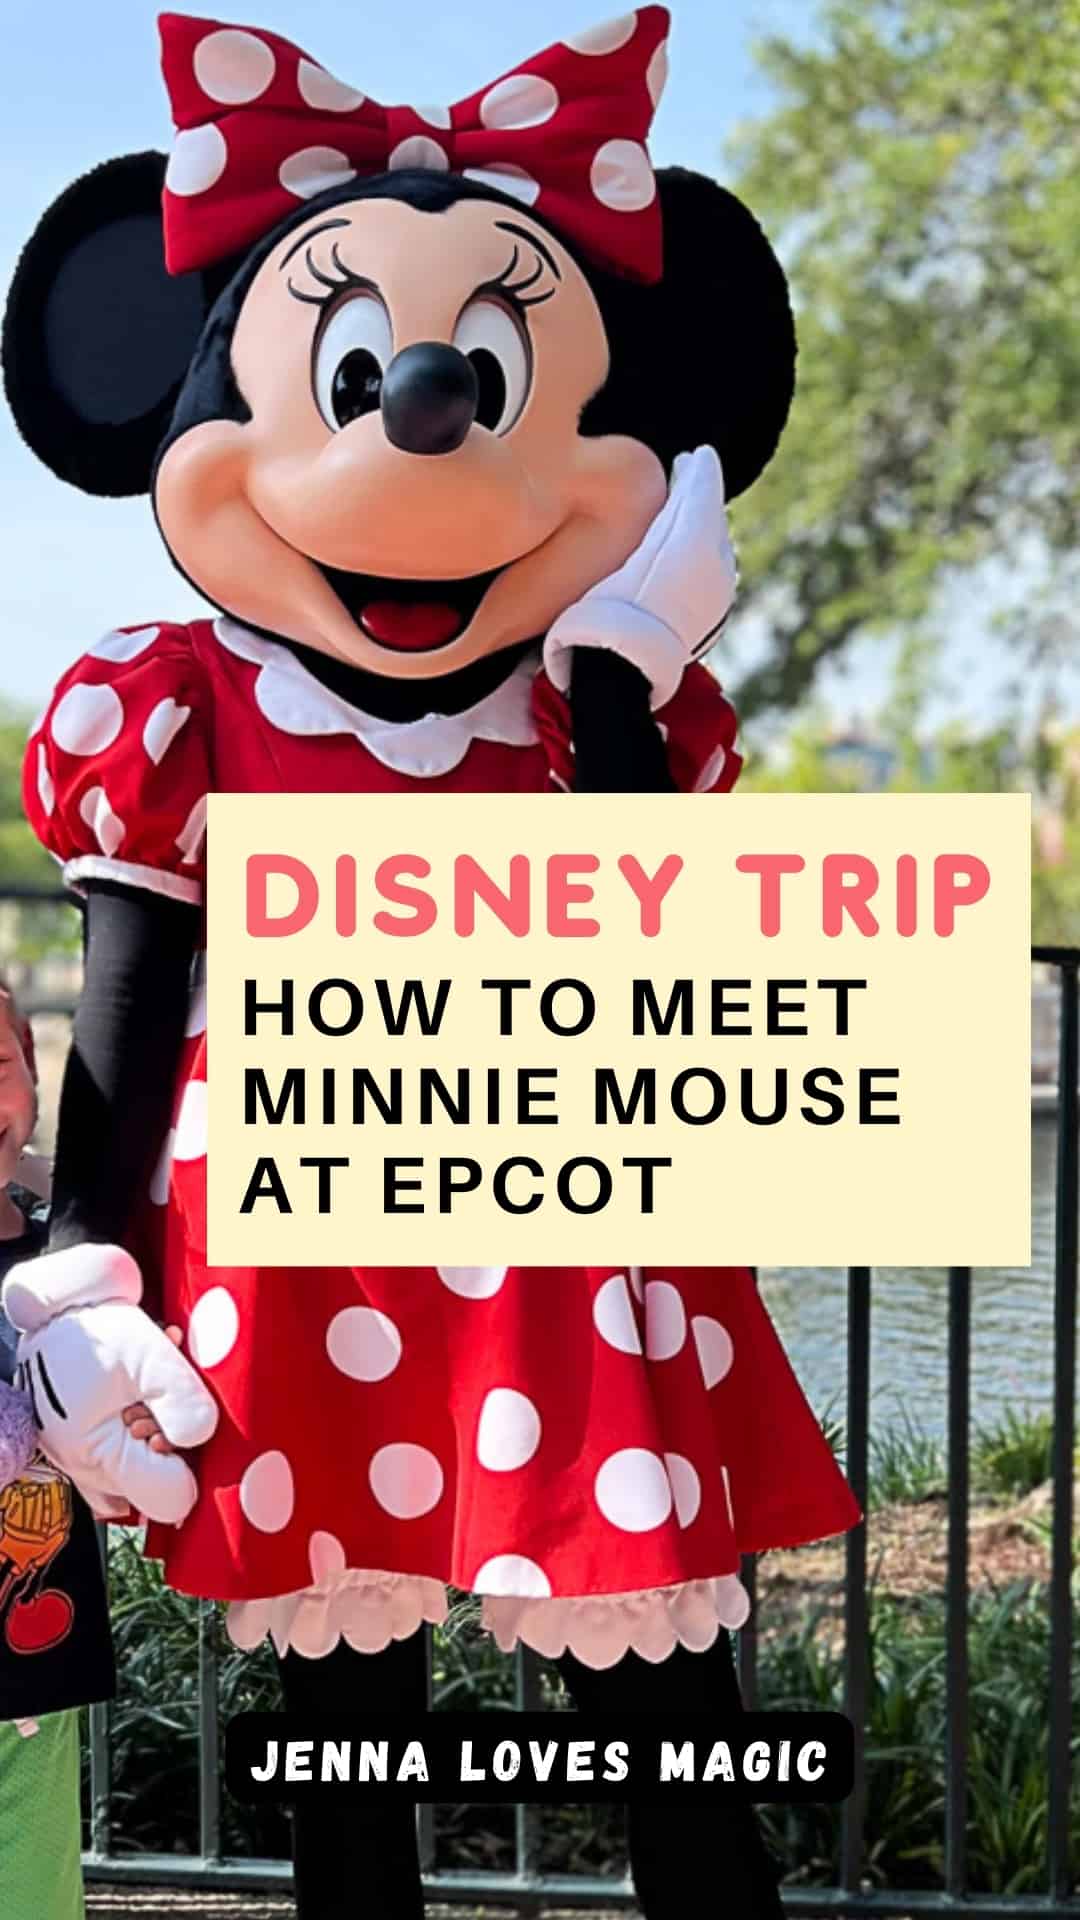 Minnie Mouse EPCOT meet and greet location details at Walt Disney World with text overlay and Jenna Loves Magic logo